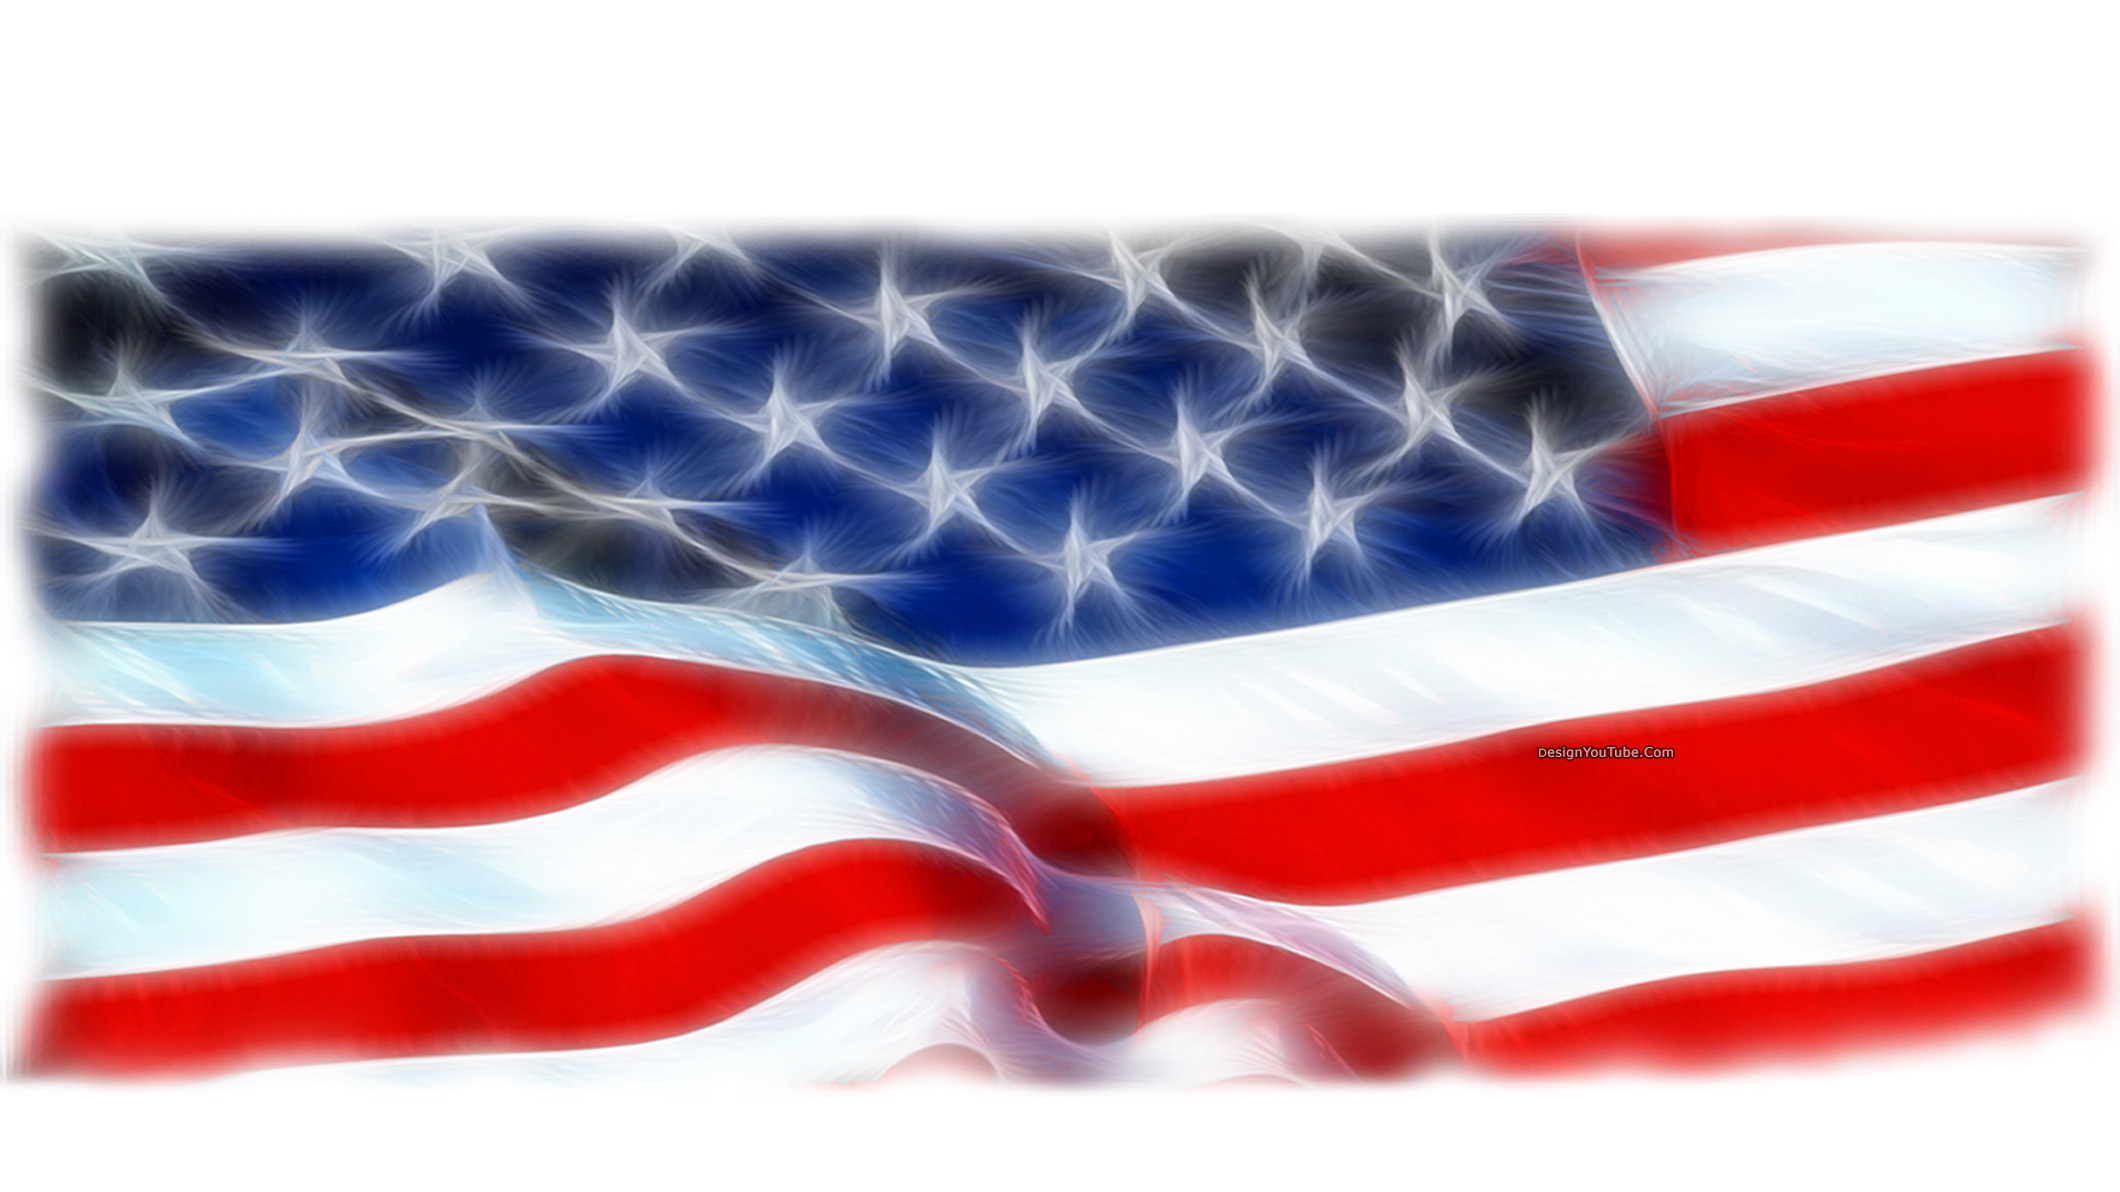 American Flag Images For Facebook Cover We have compiled several american flag images in honor